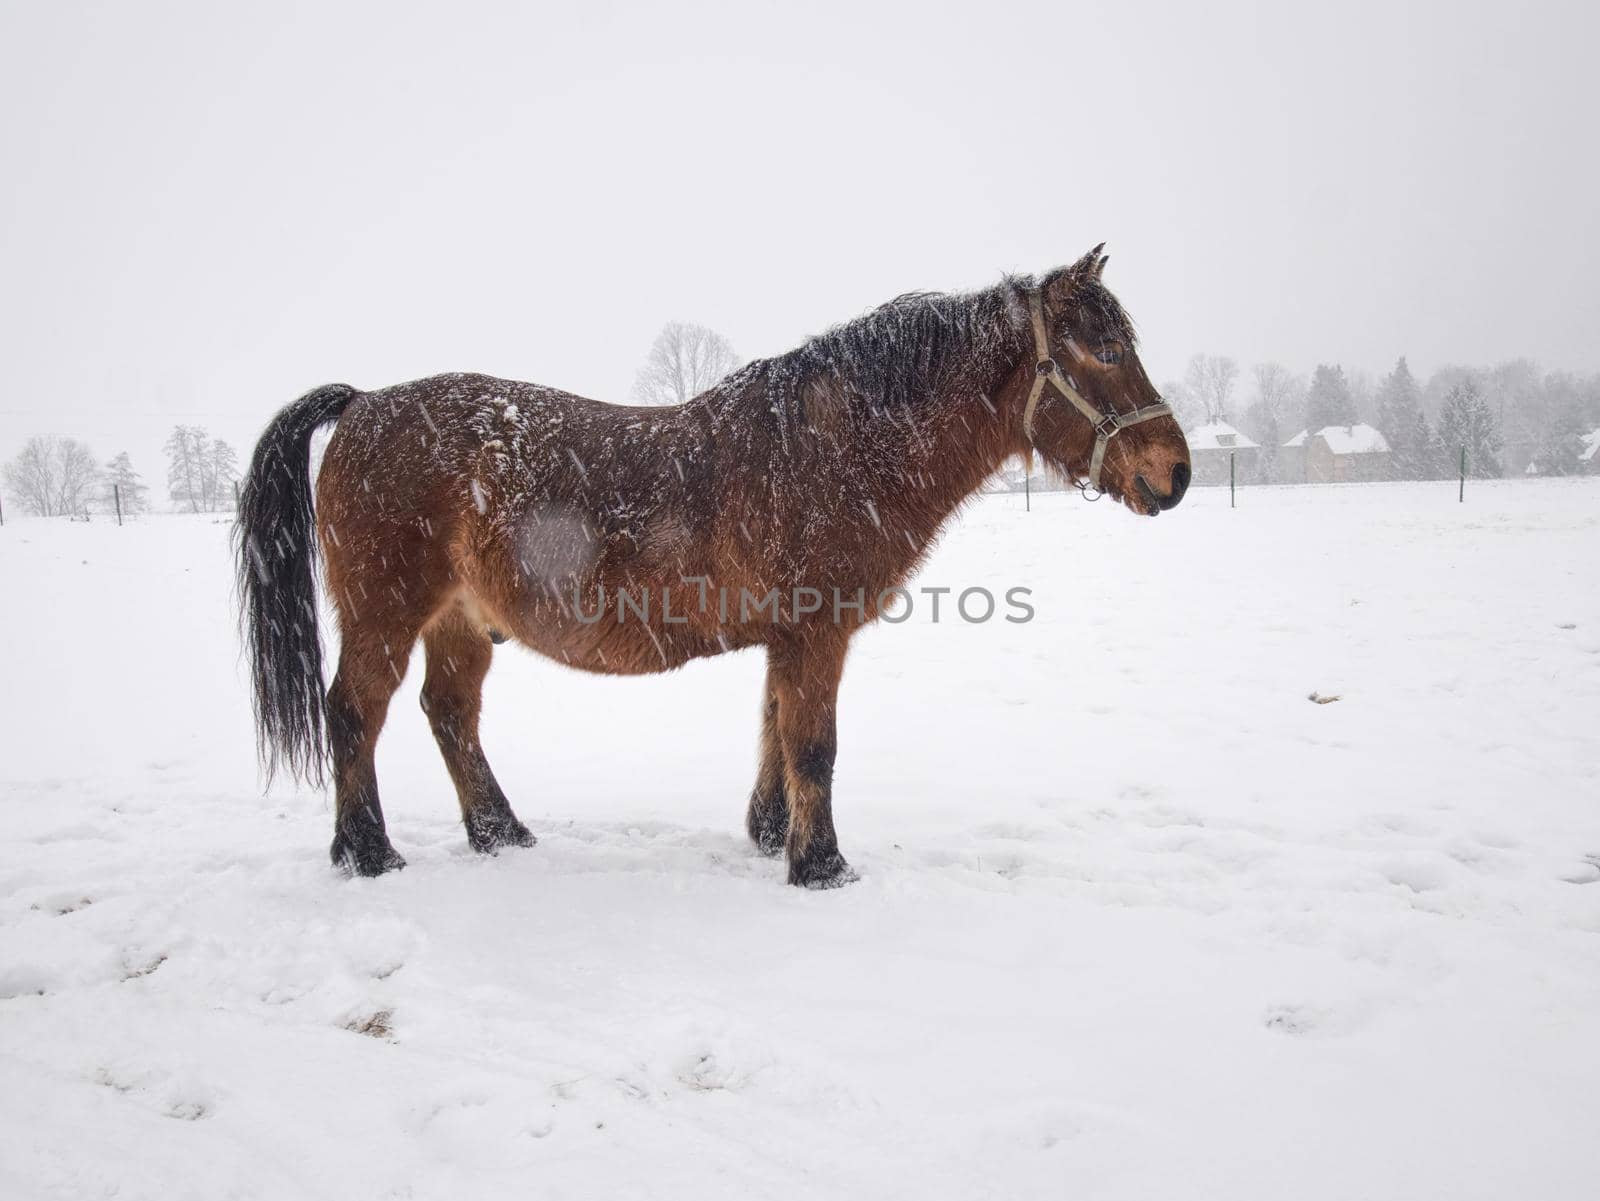 Old brown horse in farm paddock curiously looks at the camera. Snowing and paddock is covered with wet snow